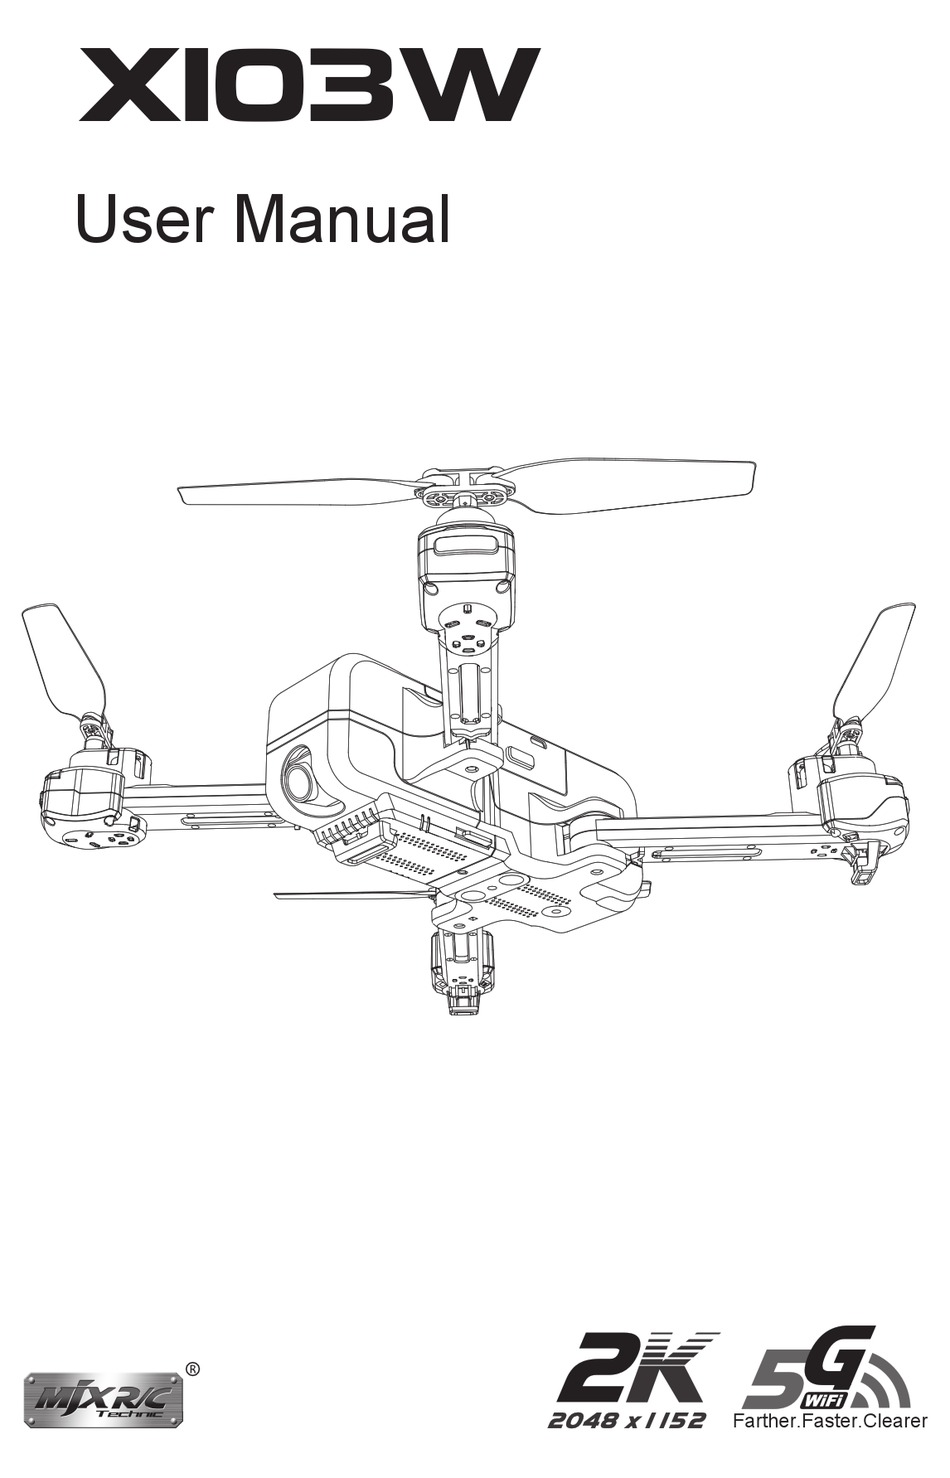 Sanrock Cyclone Drone Instructions - Picture Of Drone